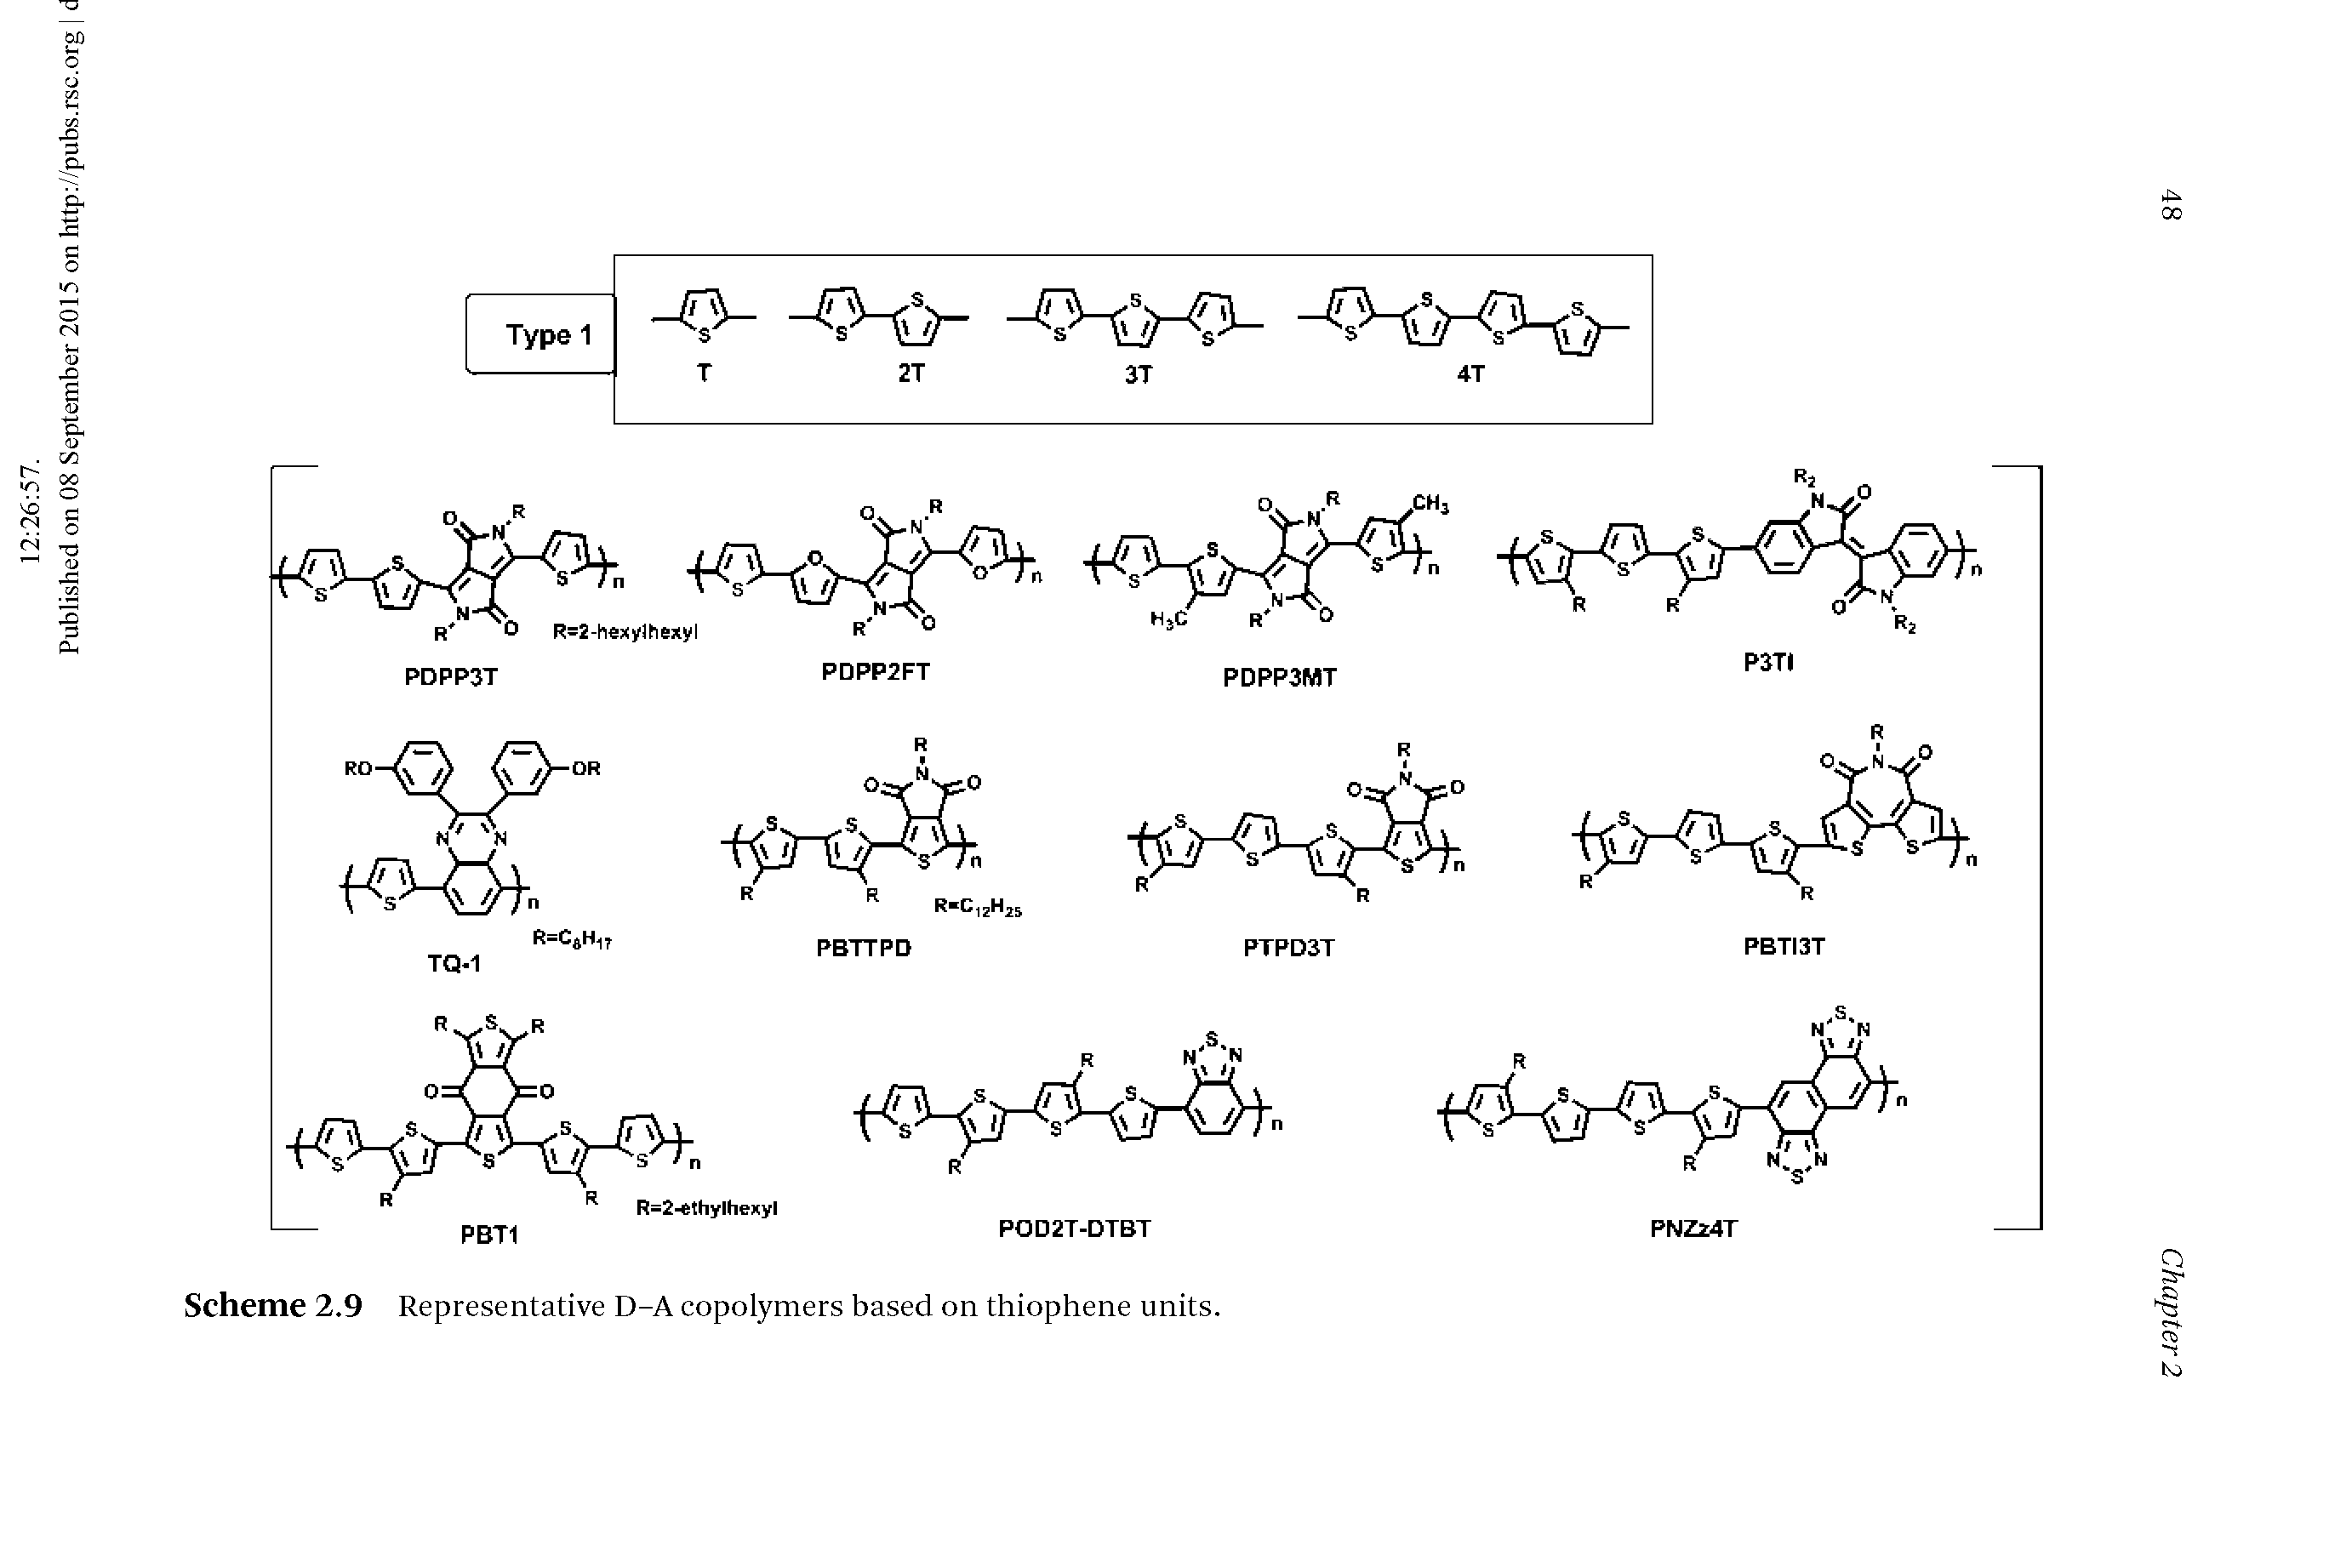 Scheme 2.9 Representative D-A copolymers based on thiophene units.